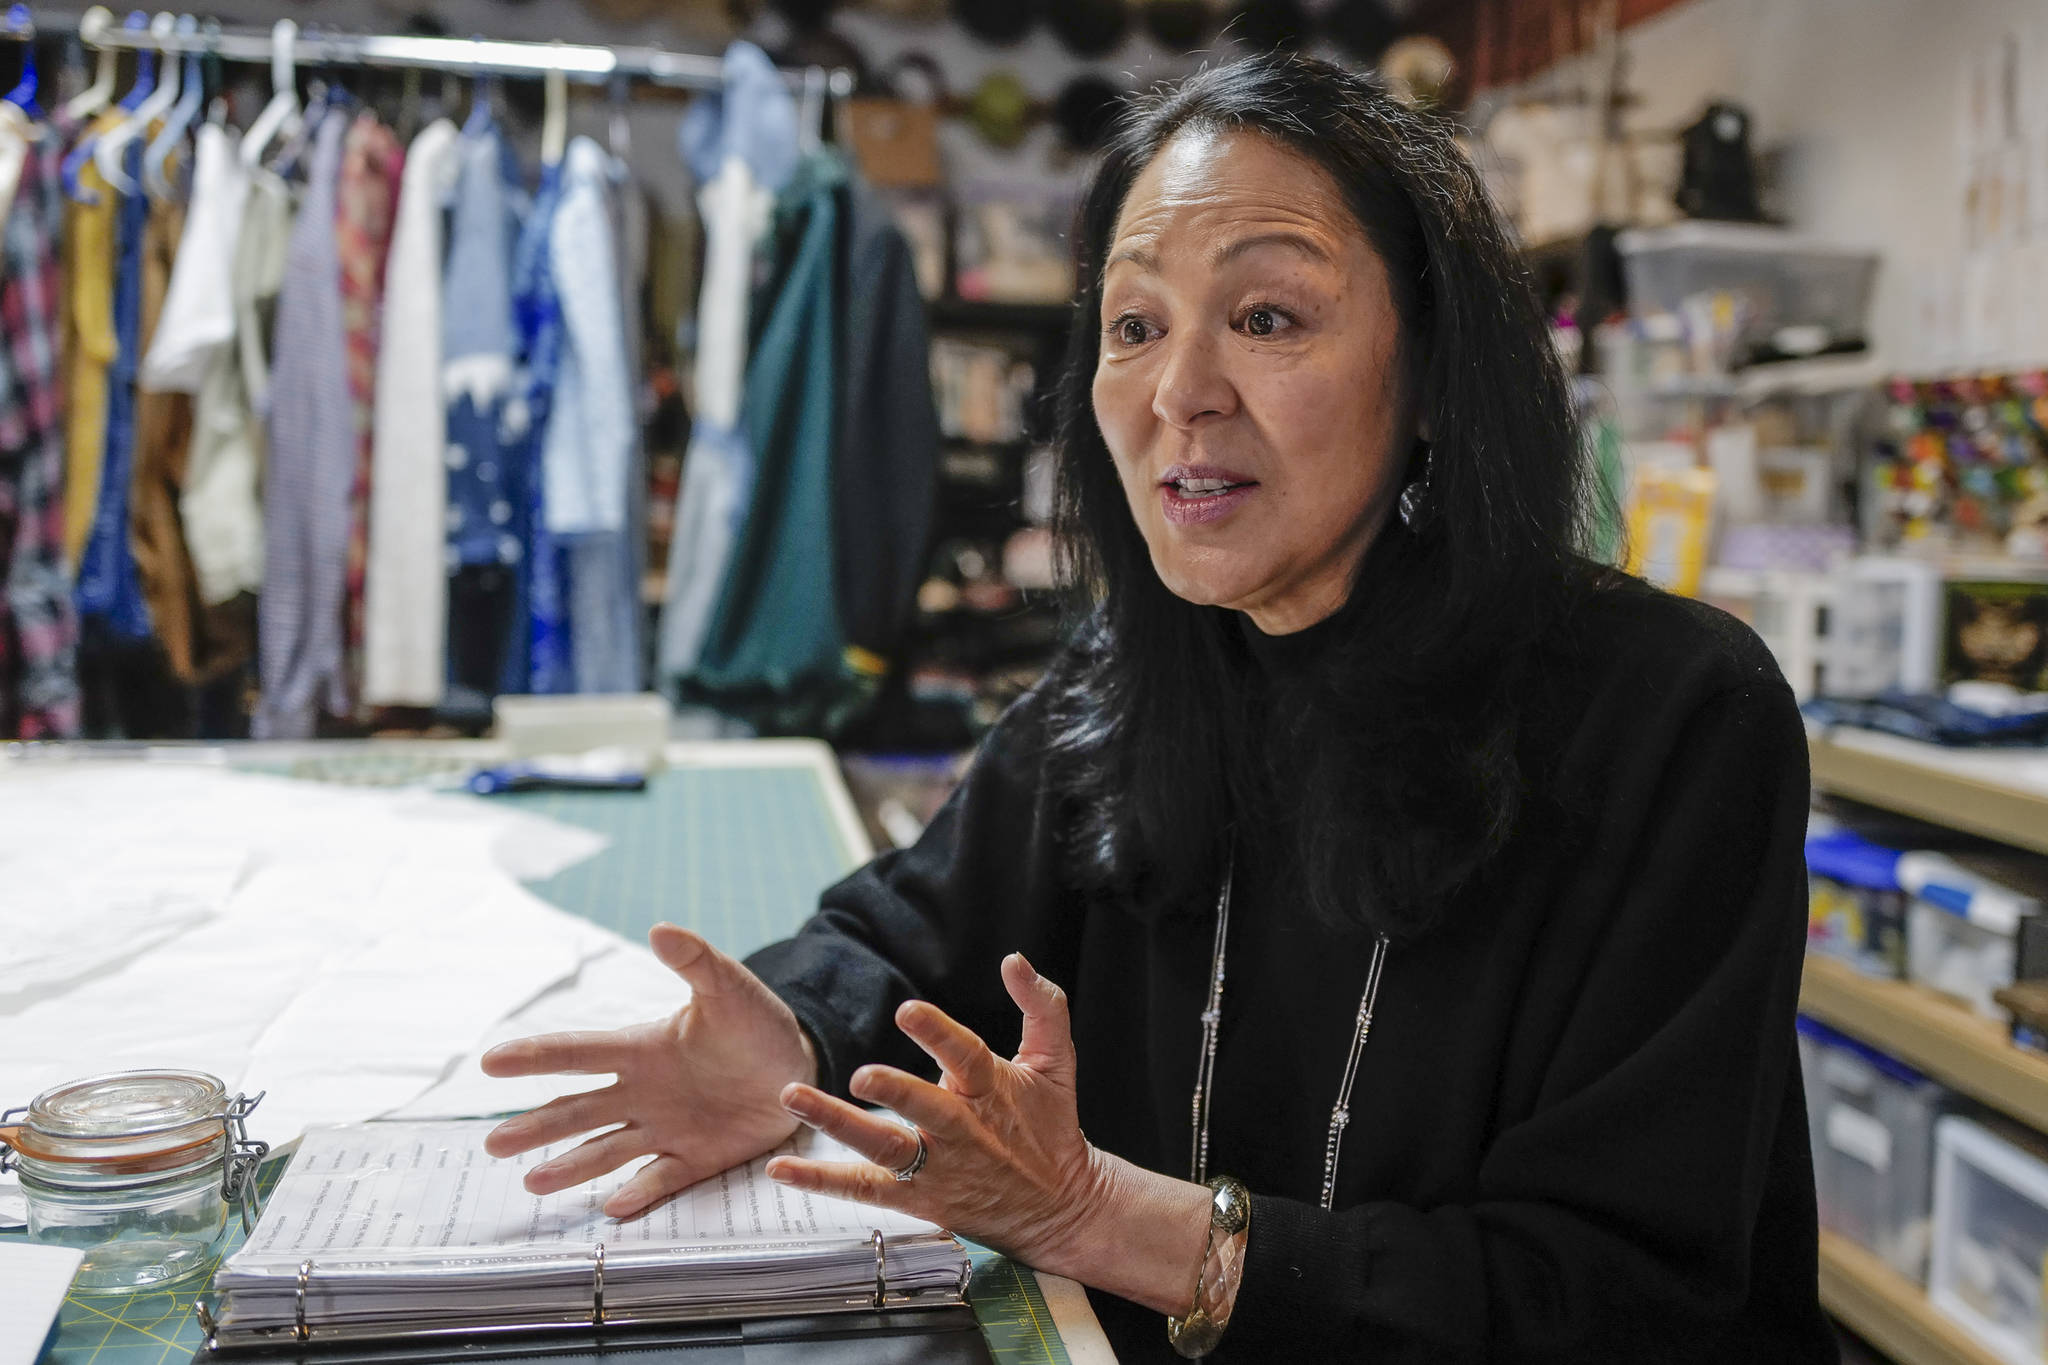 Leslie Ishii, newly named Artistic Director for Perseverance Theatre, talks about her goals for Juneau’s professional theater during an interview on Wednesday, Oct. 30, 2019. (Michael Penn | Juneau Empire)